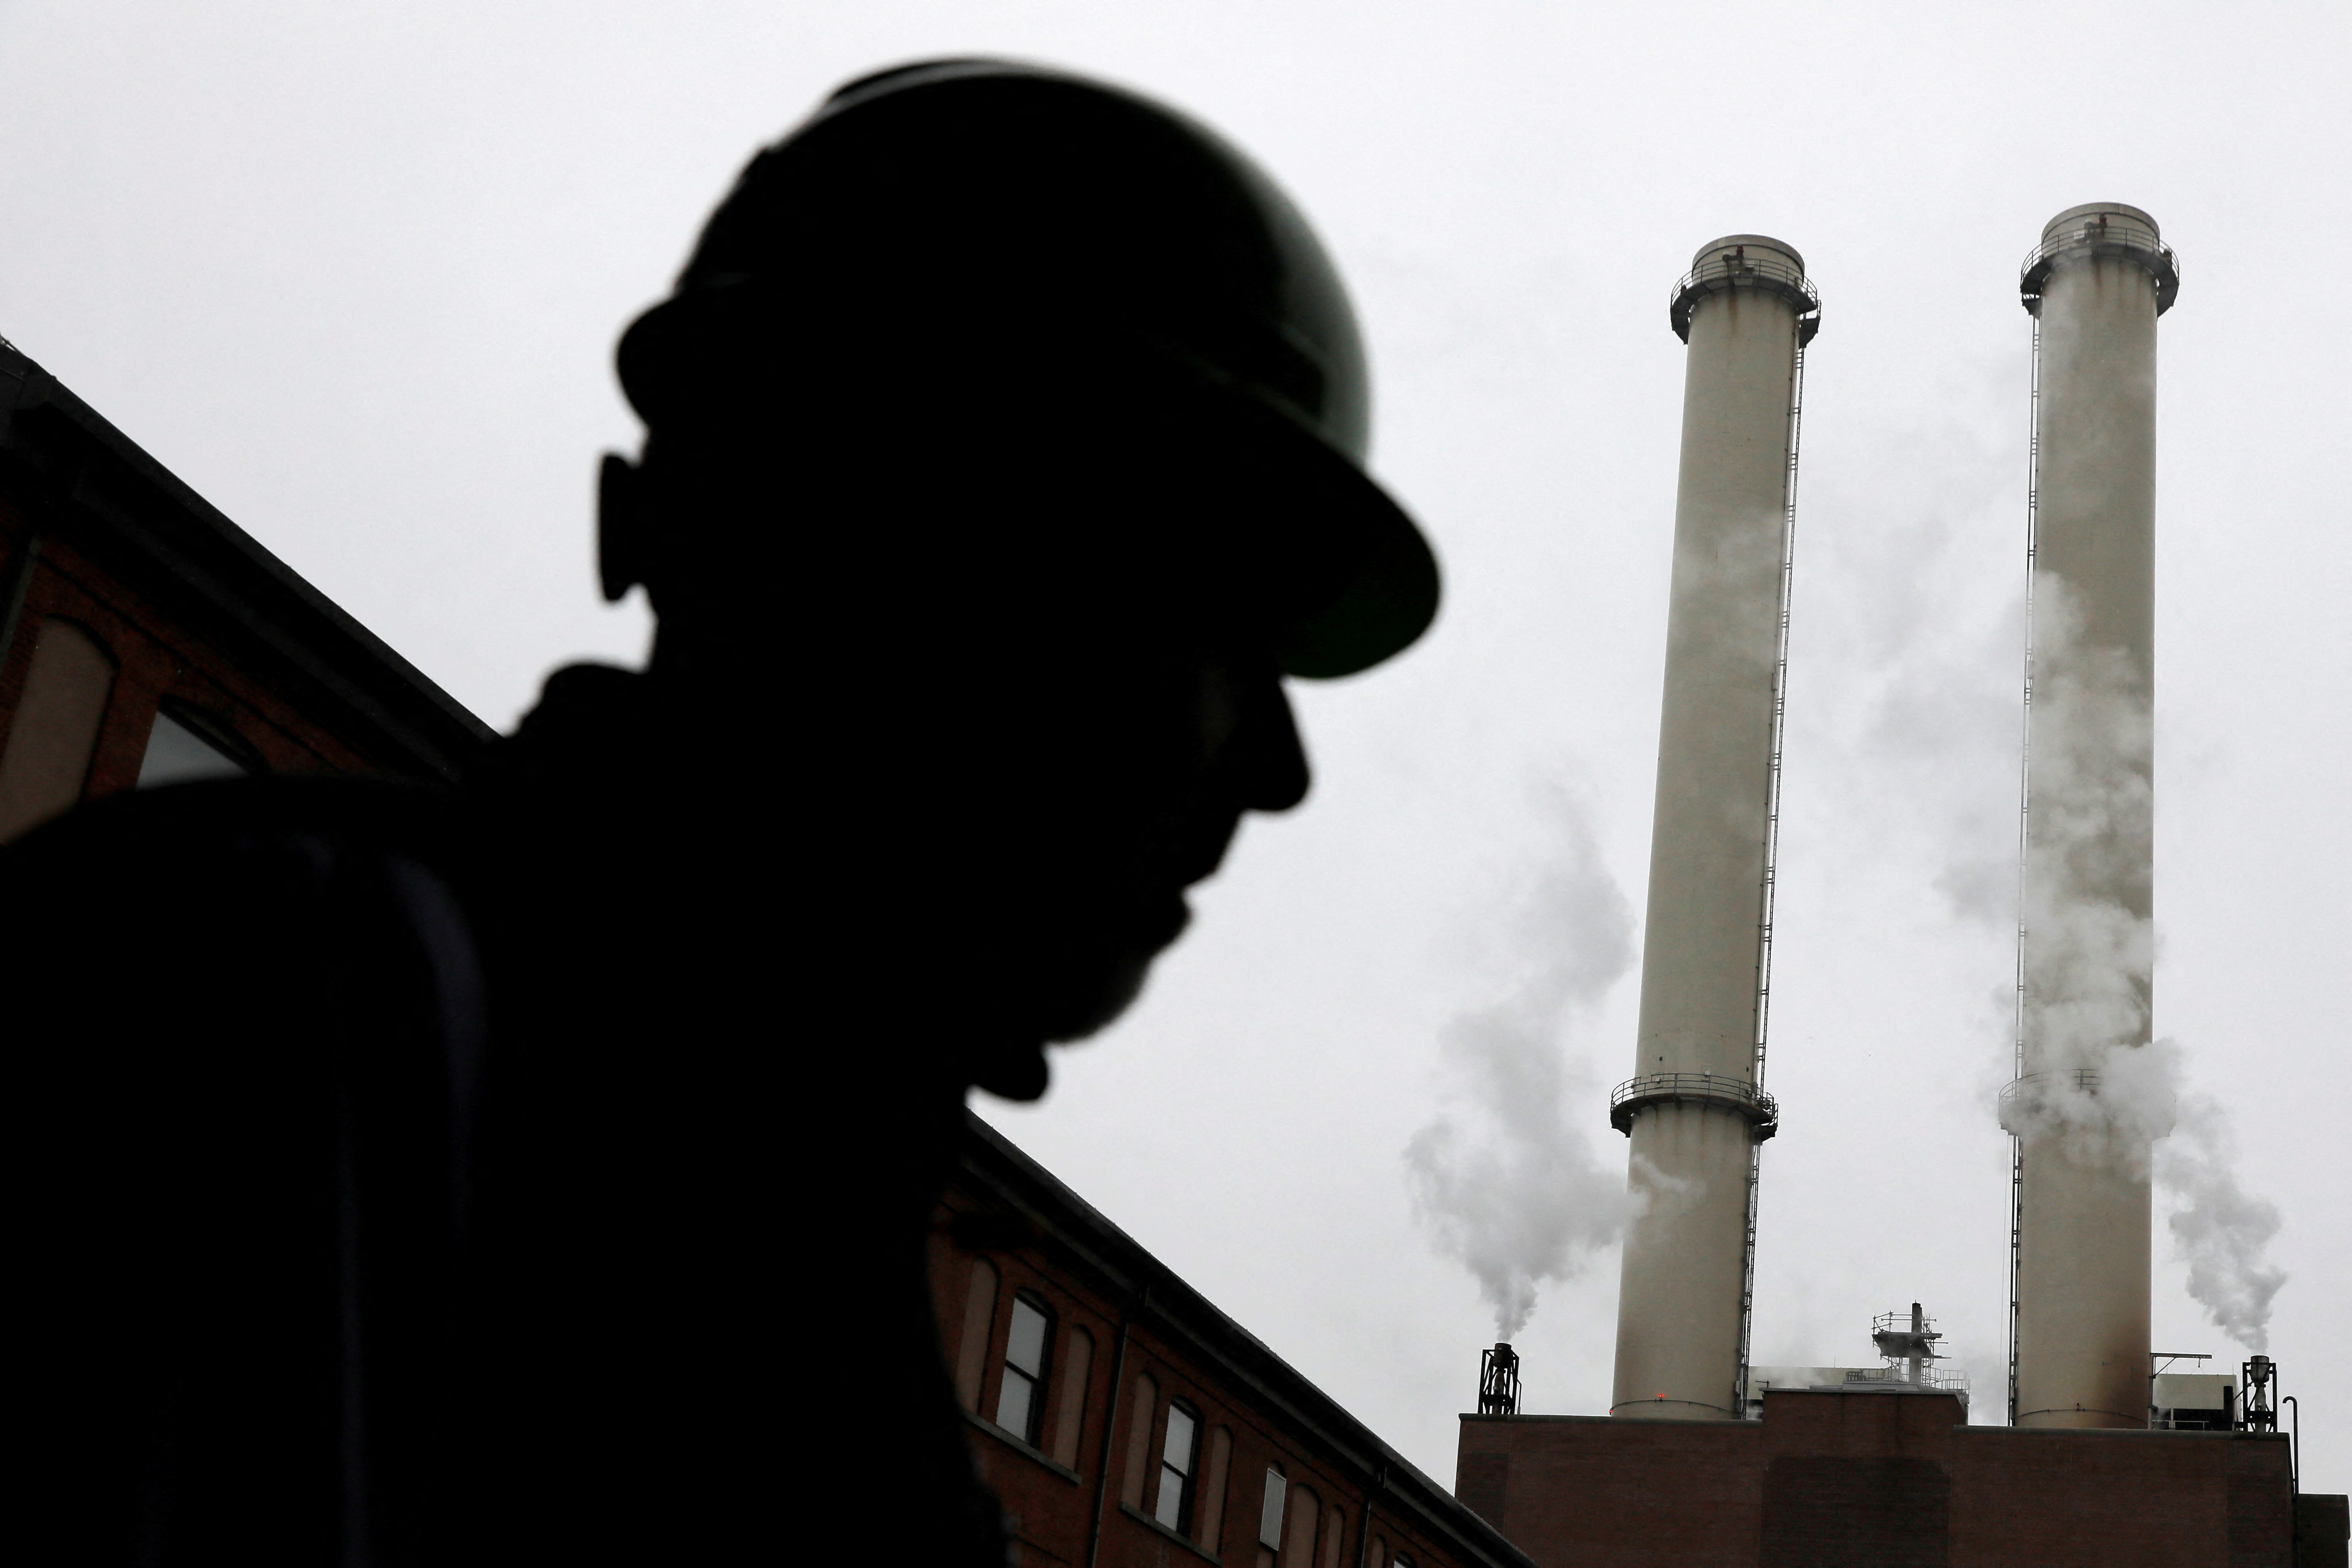 A worker stands near the chimney stacks of a neighbouring factory at IceStone, a manufacturer of recycled glass countertops and surfaces, in New York City